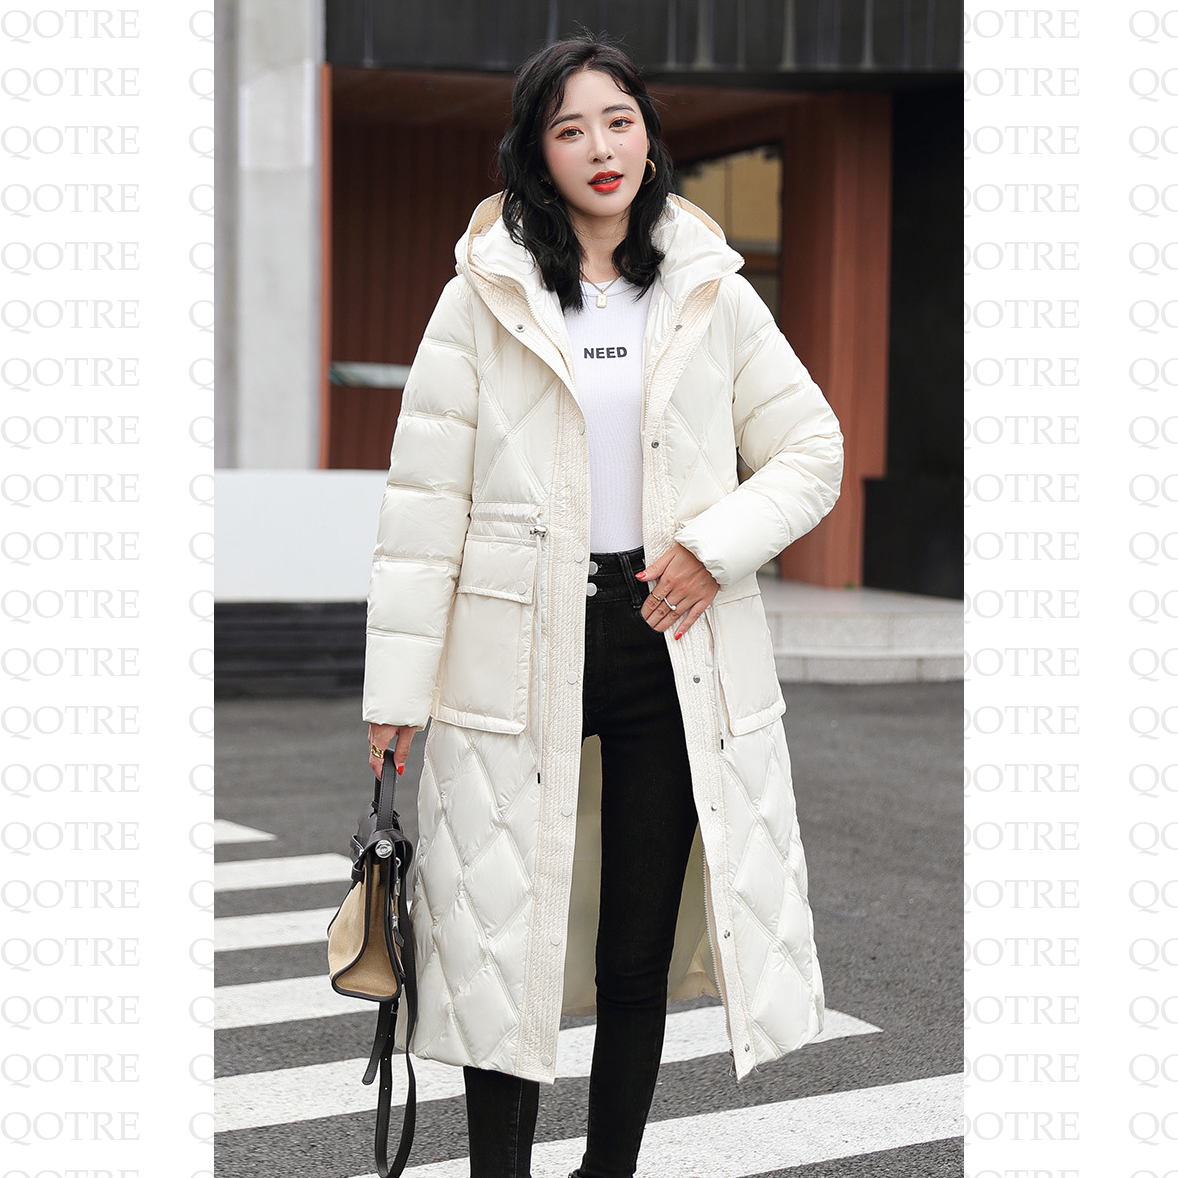 Cinched Waist Windproof Quilted Puffer Coat